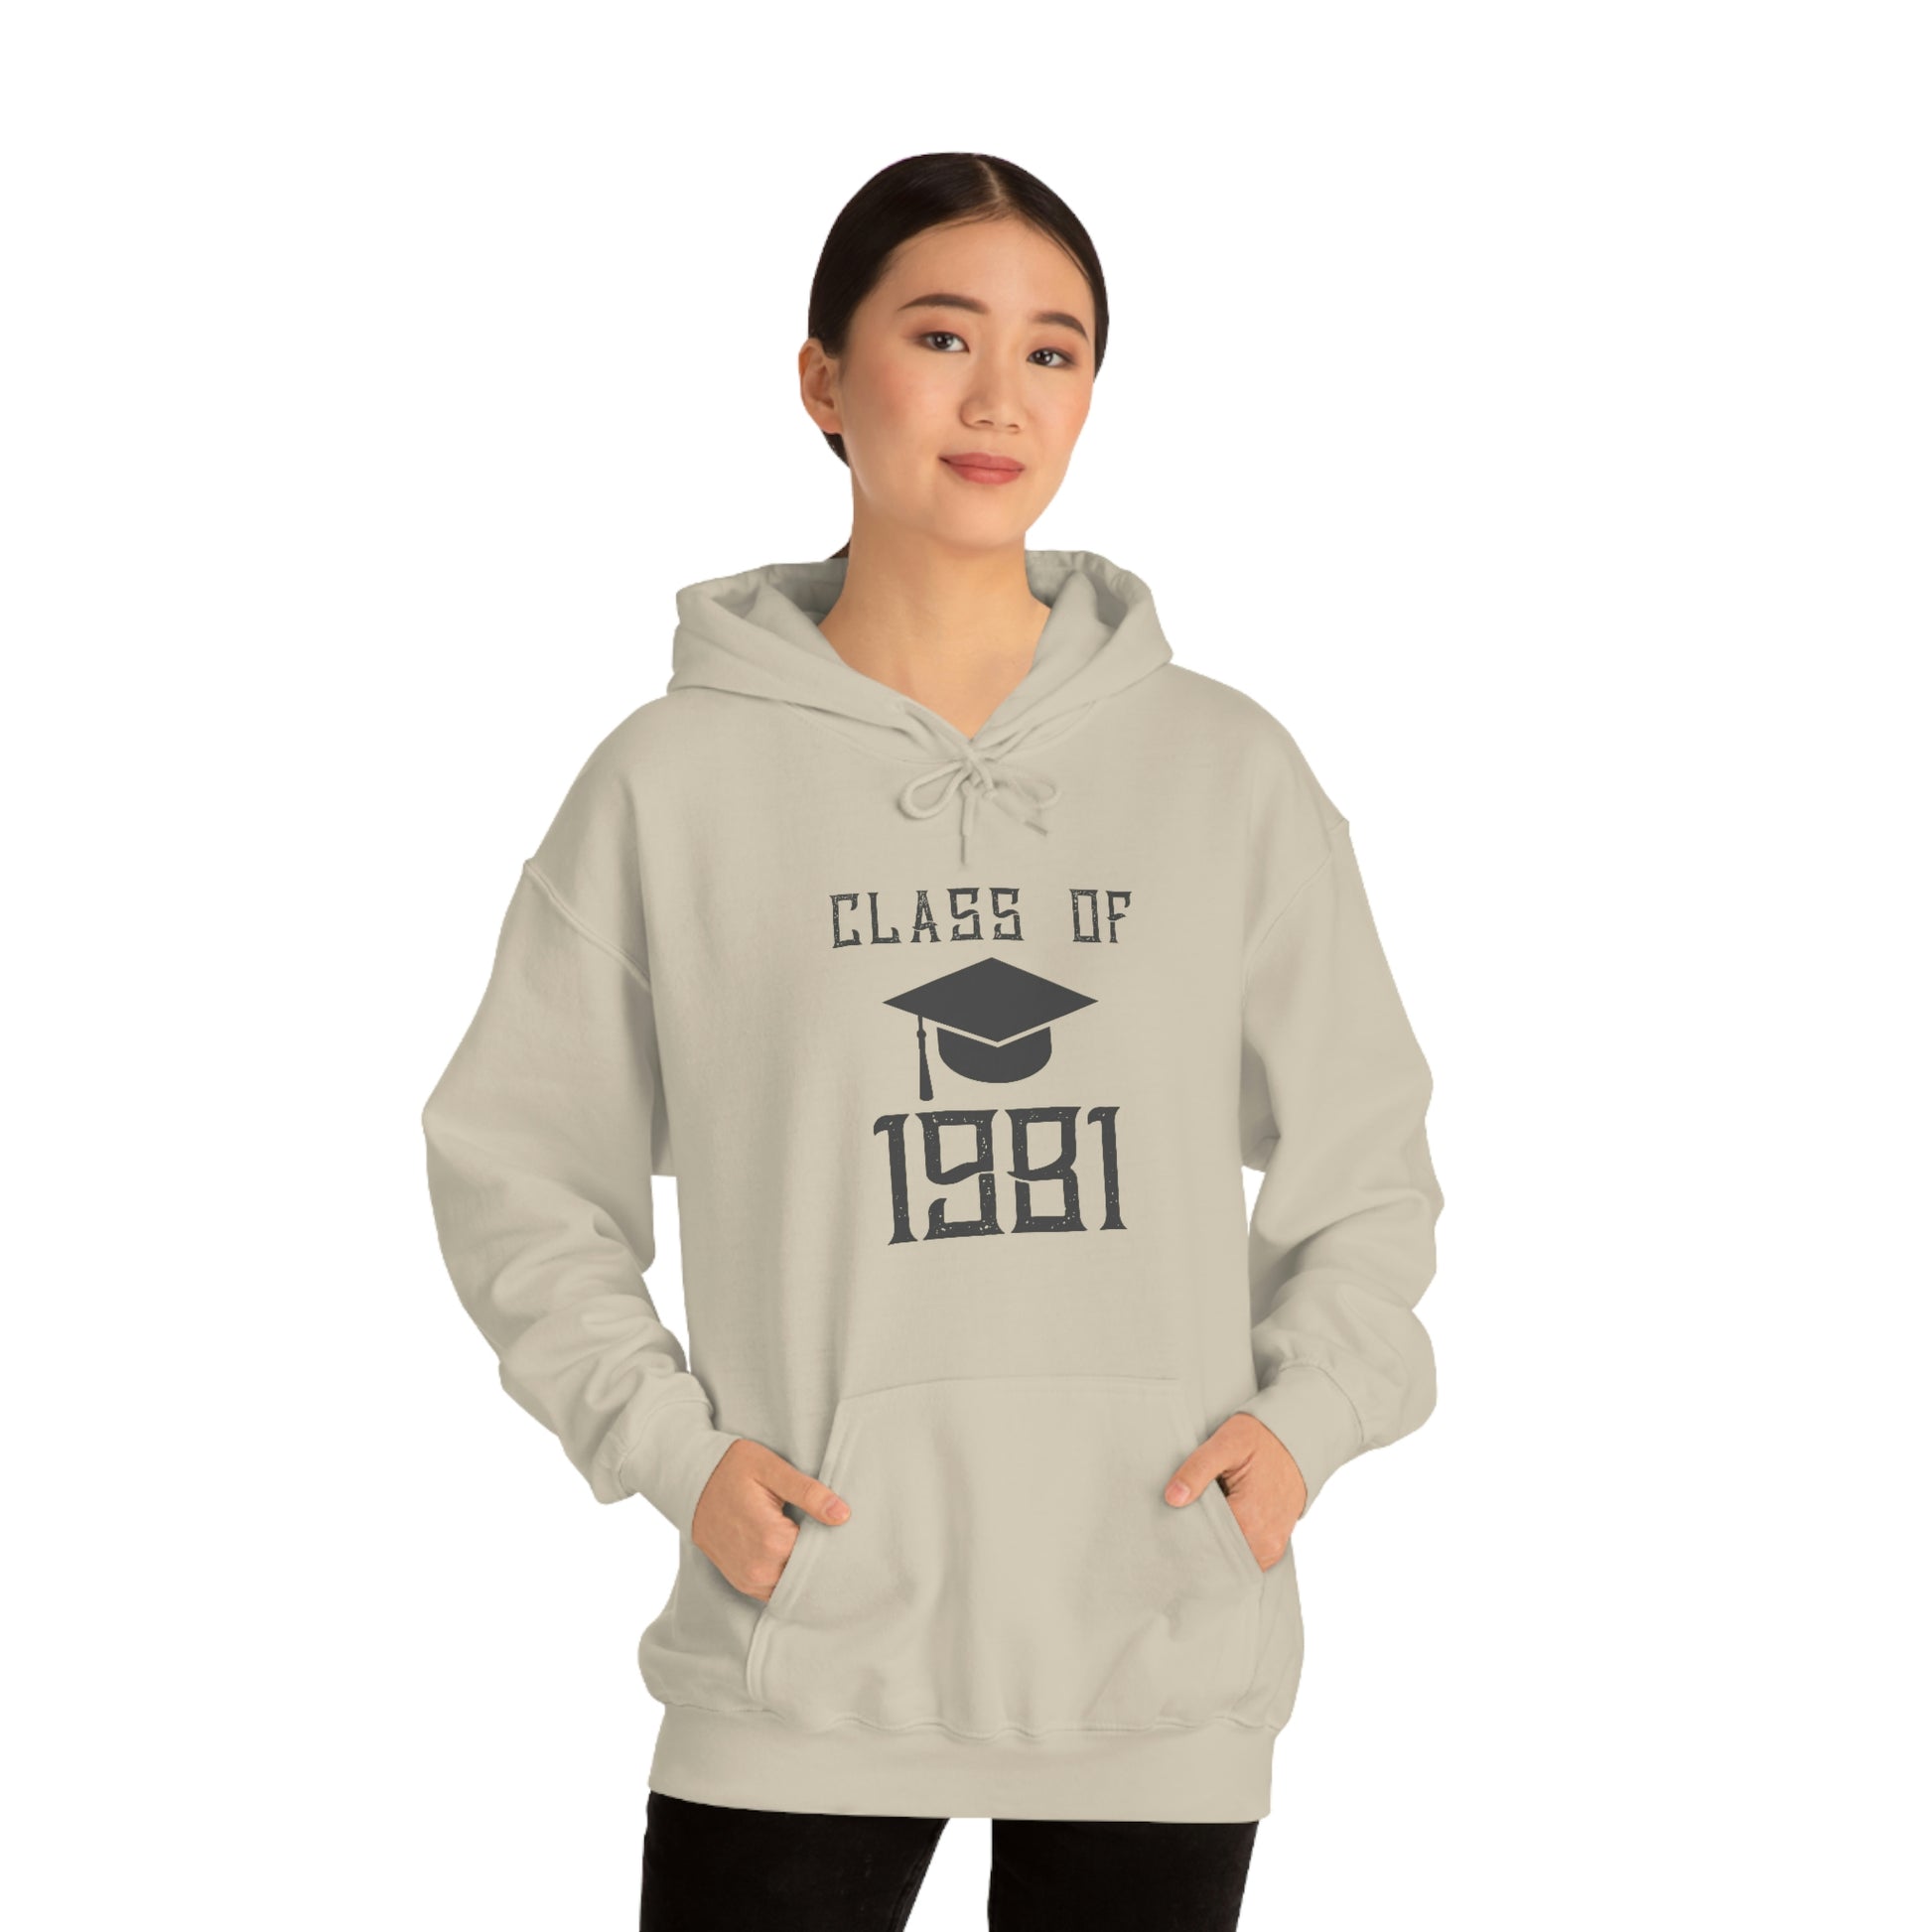 "Timeless '1981' hoodie, perfect for class reunions and commemoration."